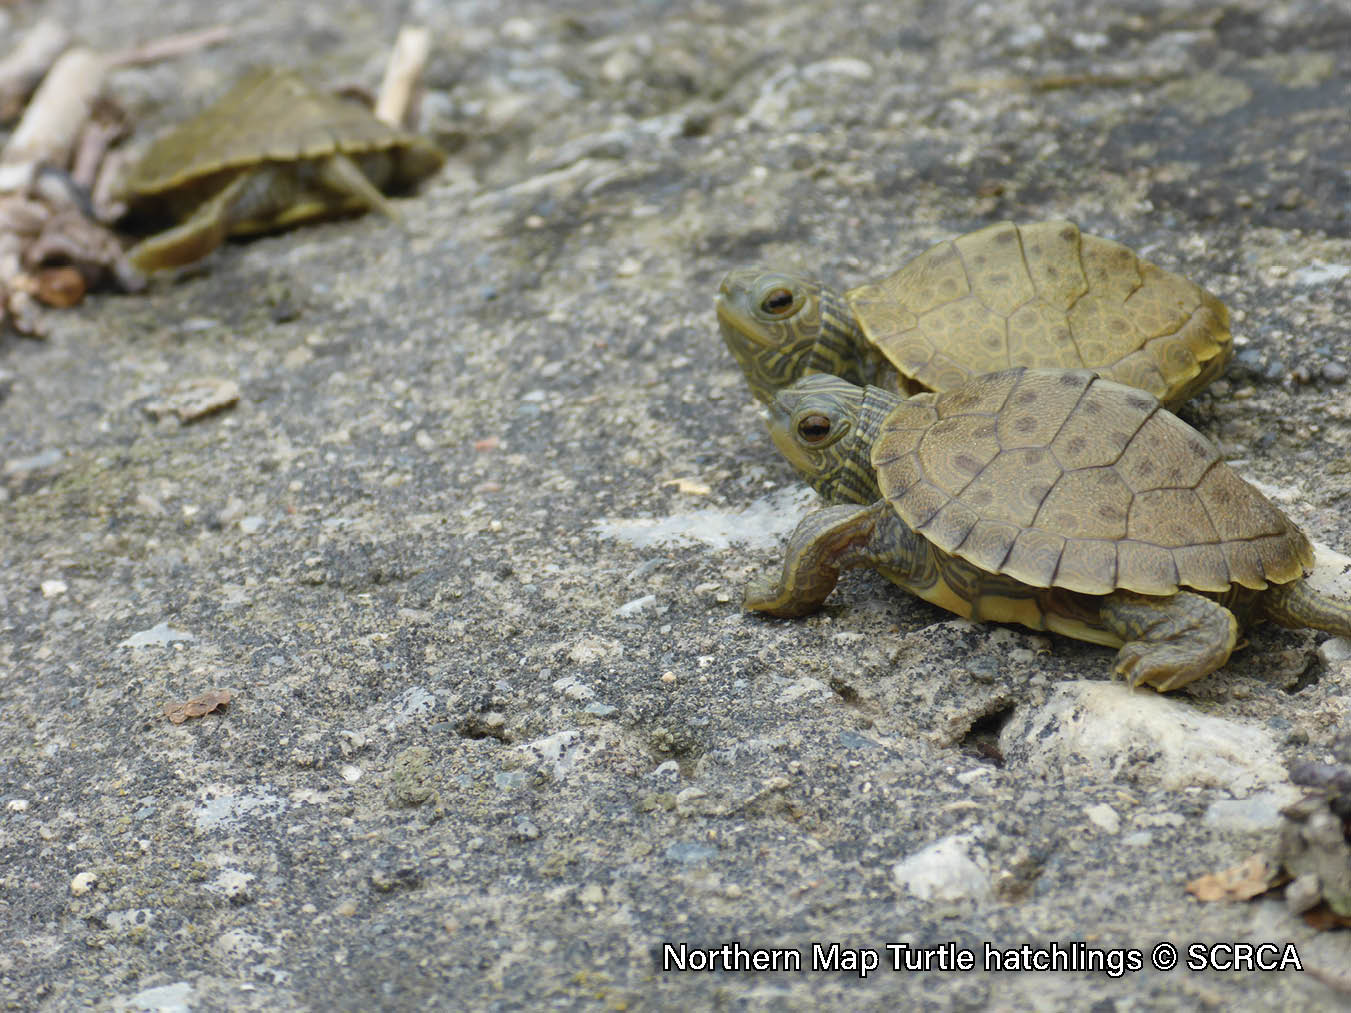 Picture of three Northern Map Turtle hatchlings on a riverbank. The turtle has a brown shell with a yellow contour line pattern, a ridge down the midline of its shell, and the back edge is serrated. It has yellow lines on its neck and a yellow spot behind its eye.